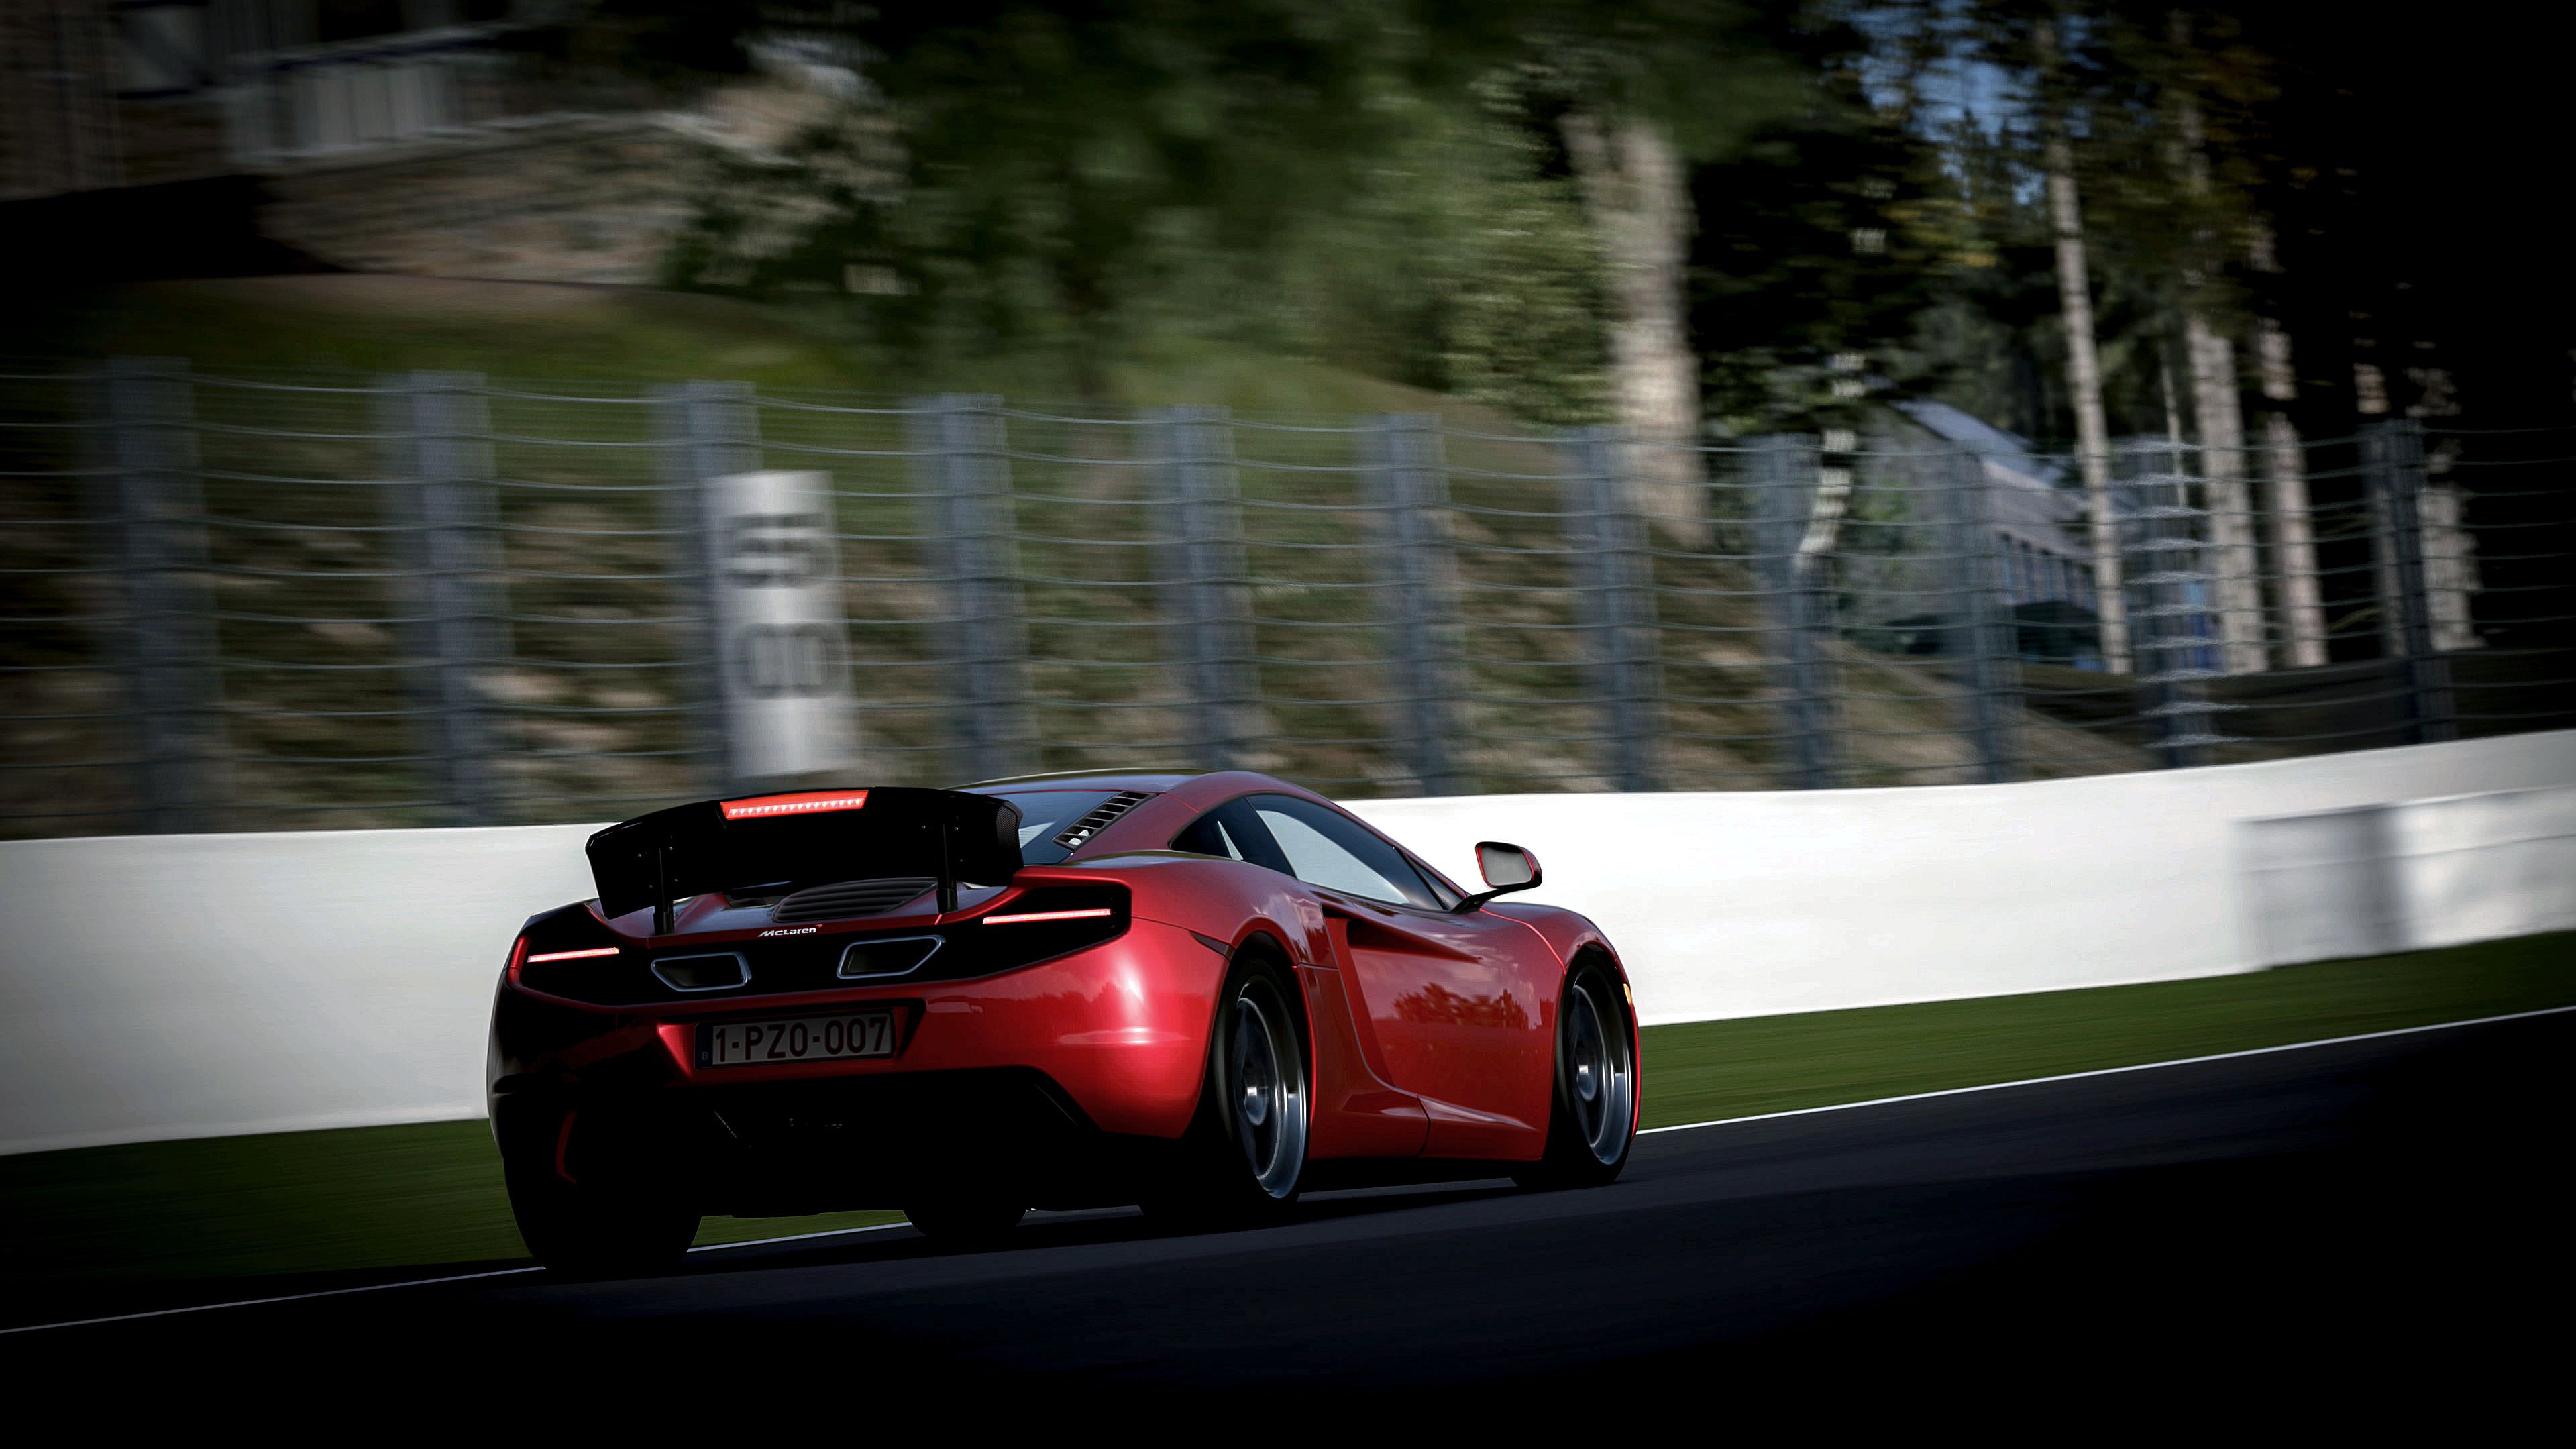 Cool Wallpapers mclaren, cars, red, traffic, movement, blur, smooth, speed